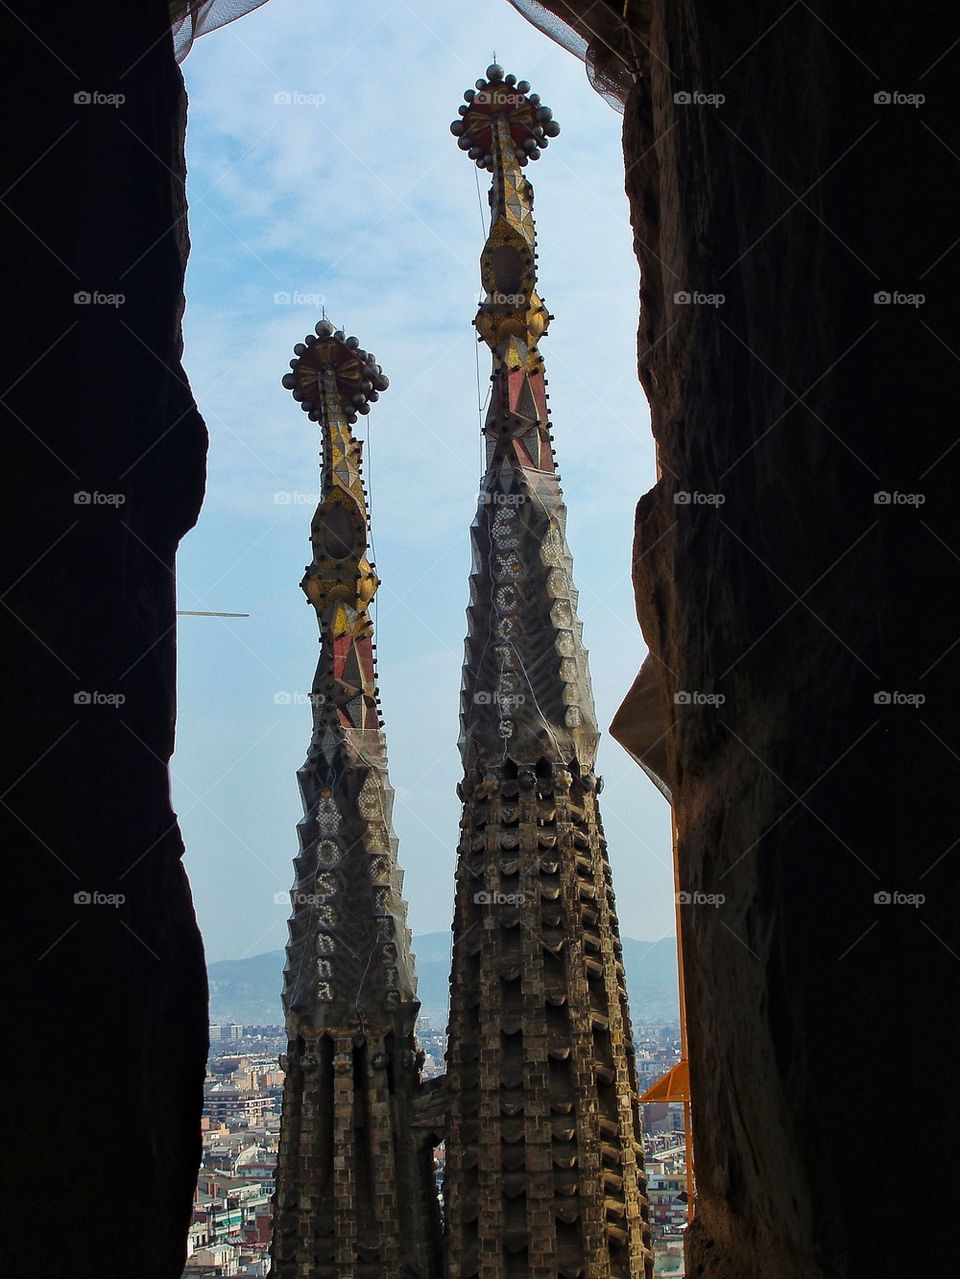 Looking out on towers of Sagrada Familia Barcelona 